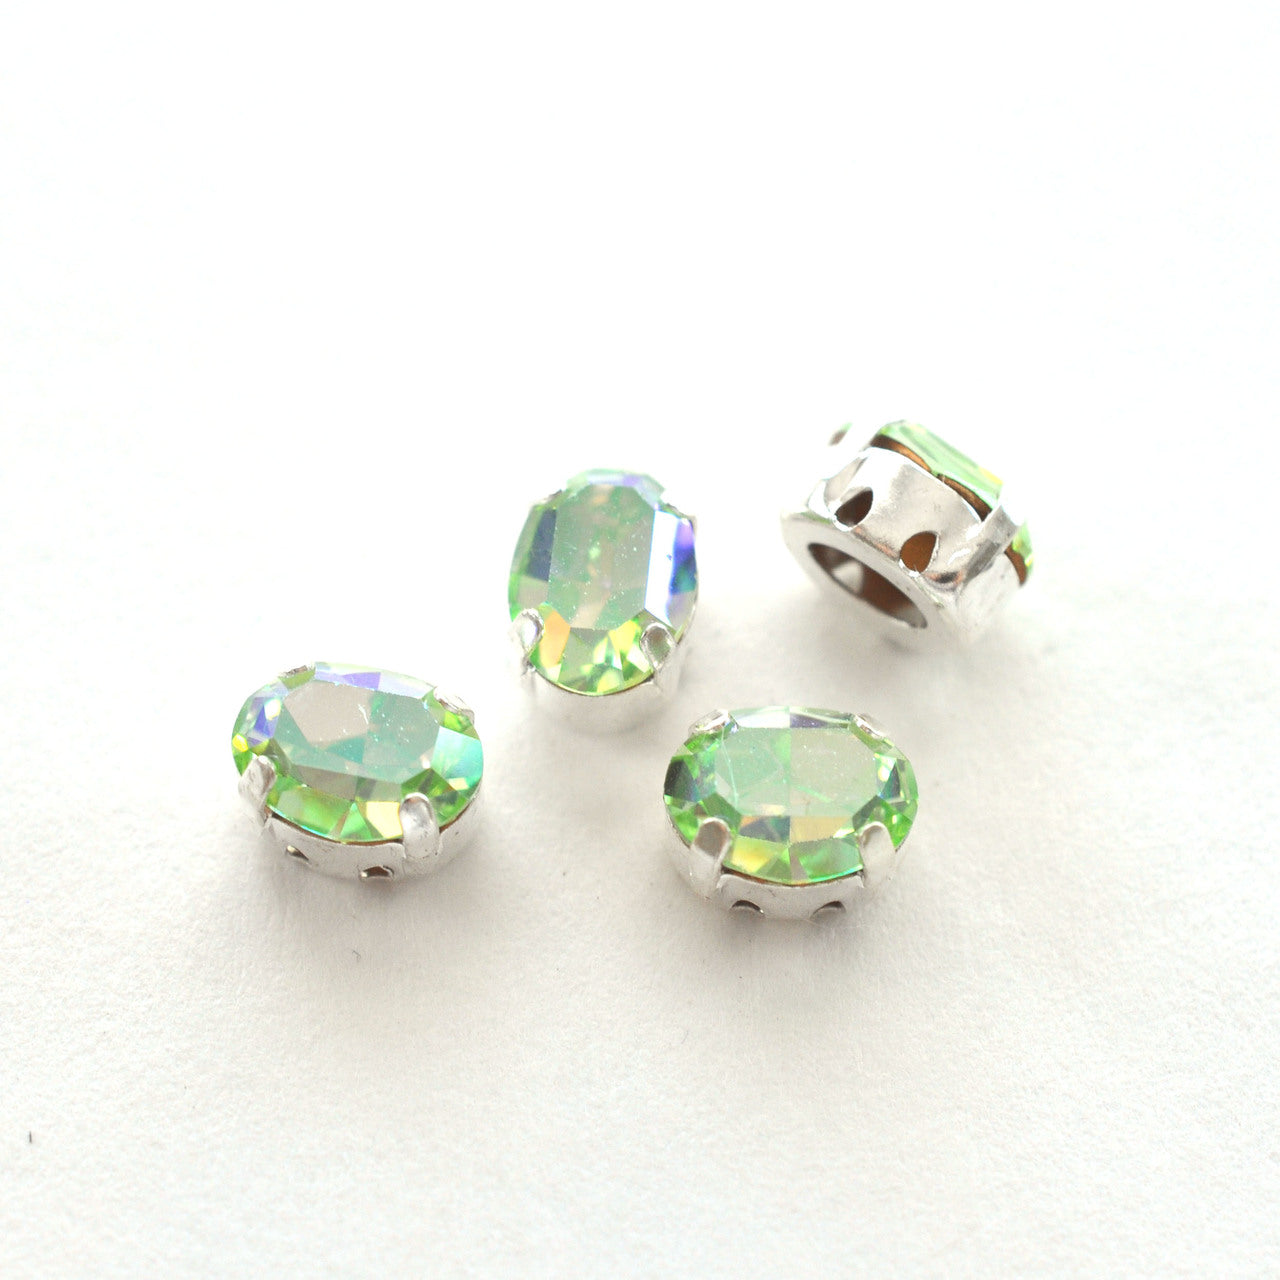 Chrysolite AB 8x6mm Sew On Set Ovals - 4 Pieces